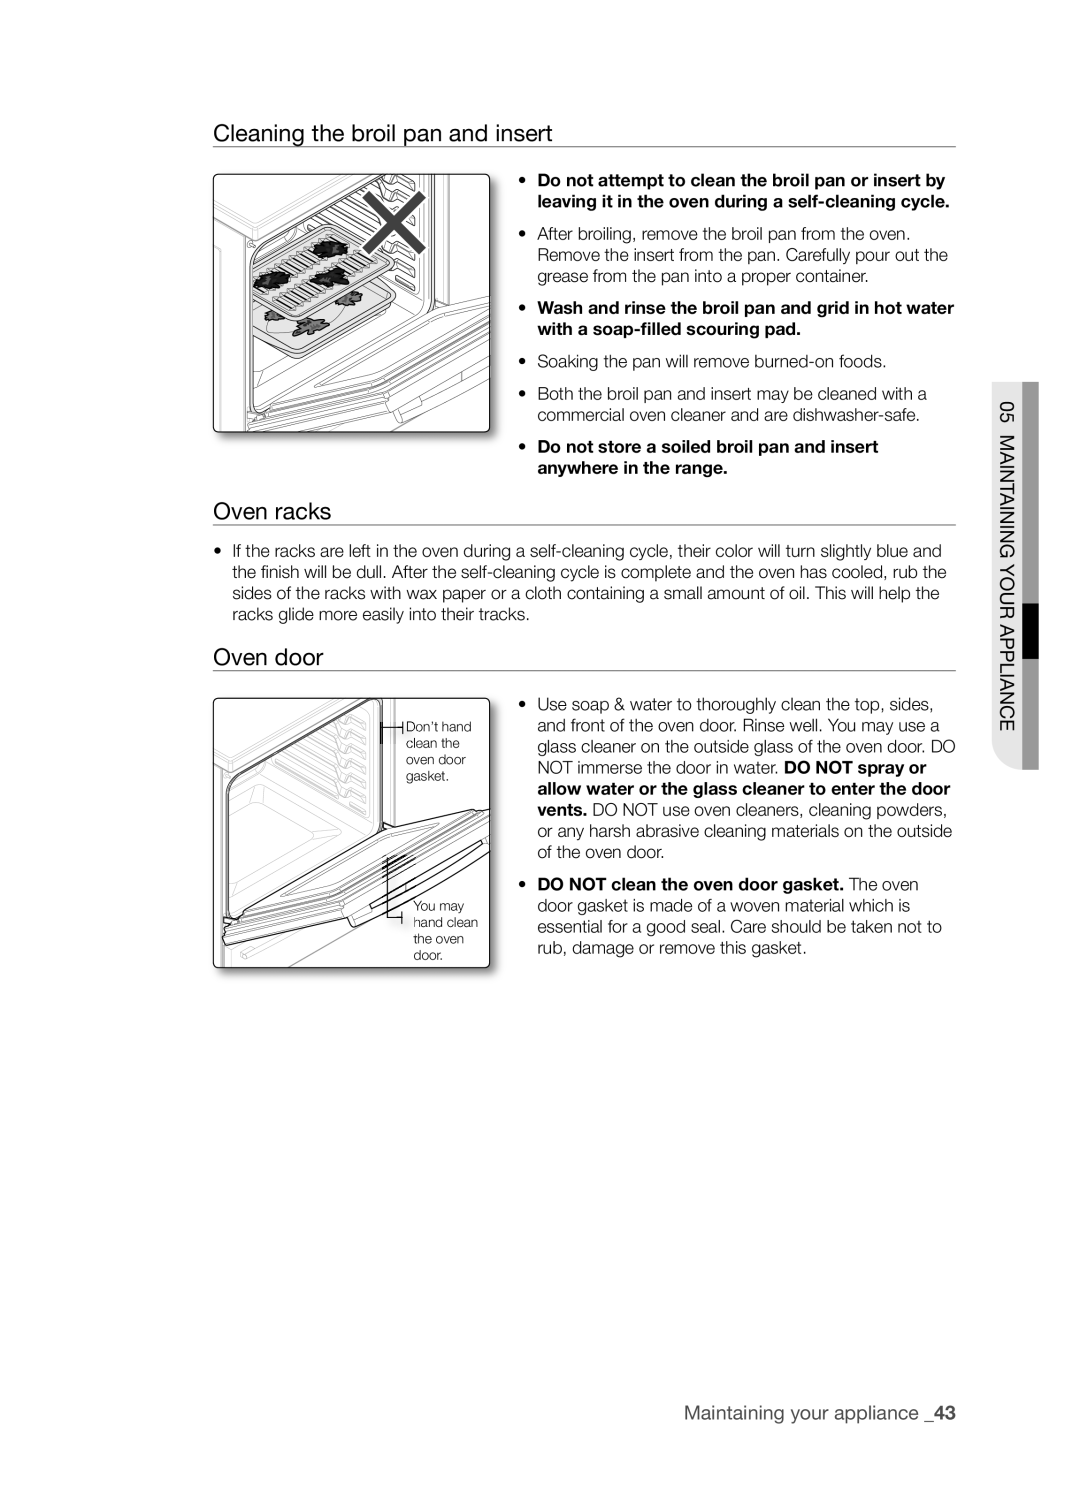 Samsung FTQ386LWX user manual Cleaning the broil pan and insert, Oven racks, Oven door, Maintaining your appliance _ 